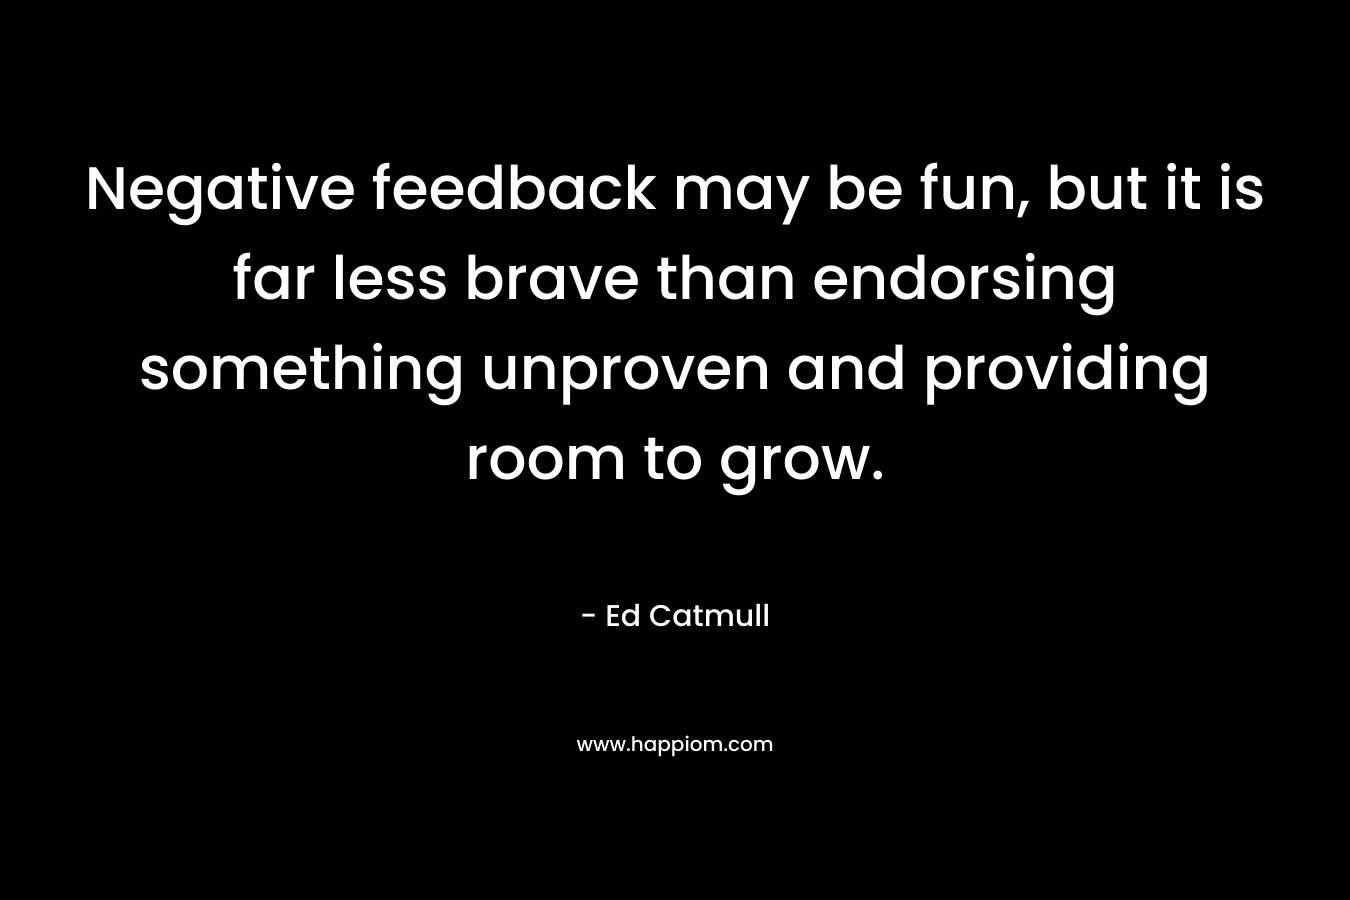 Negative feedback may be fun, but it is far less brave than endorsing something unproven and providing room to grow. – Ed Catmull